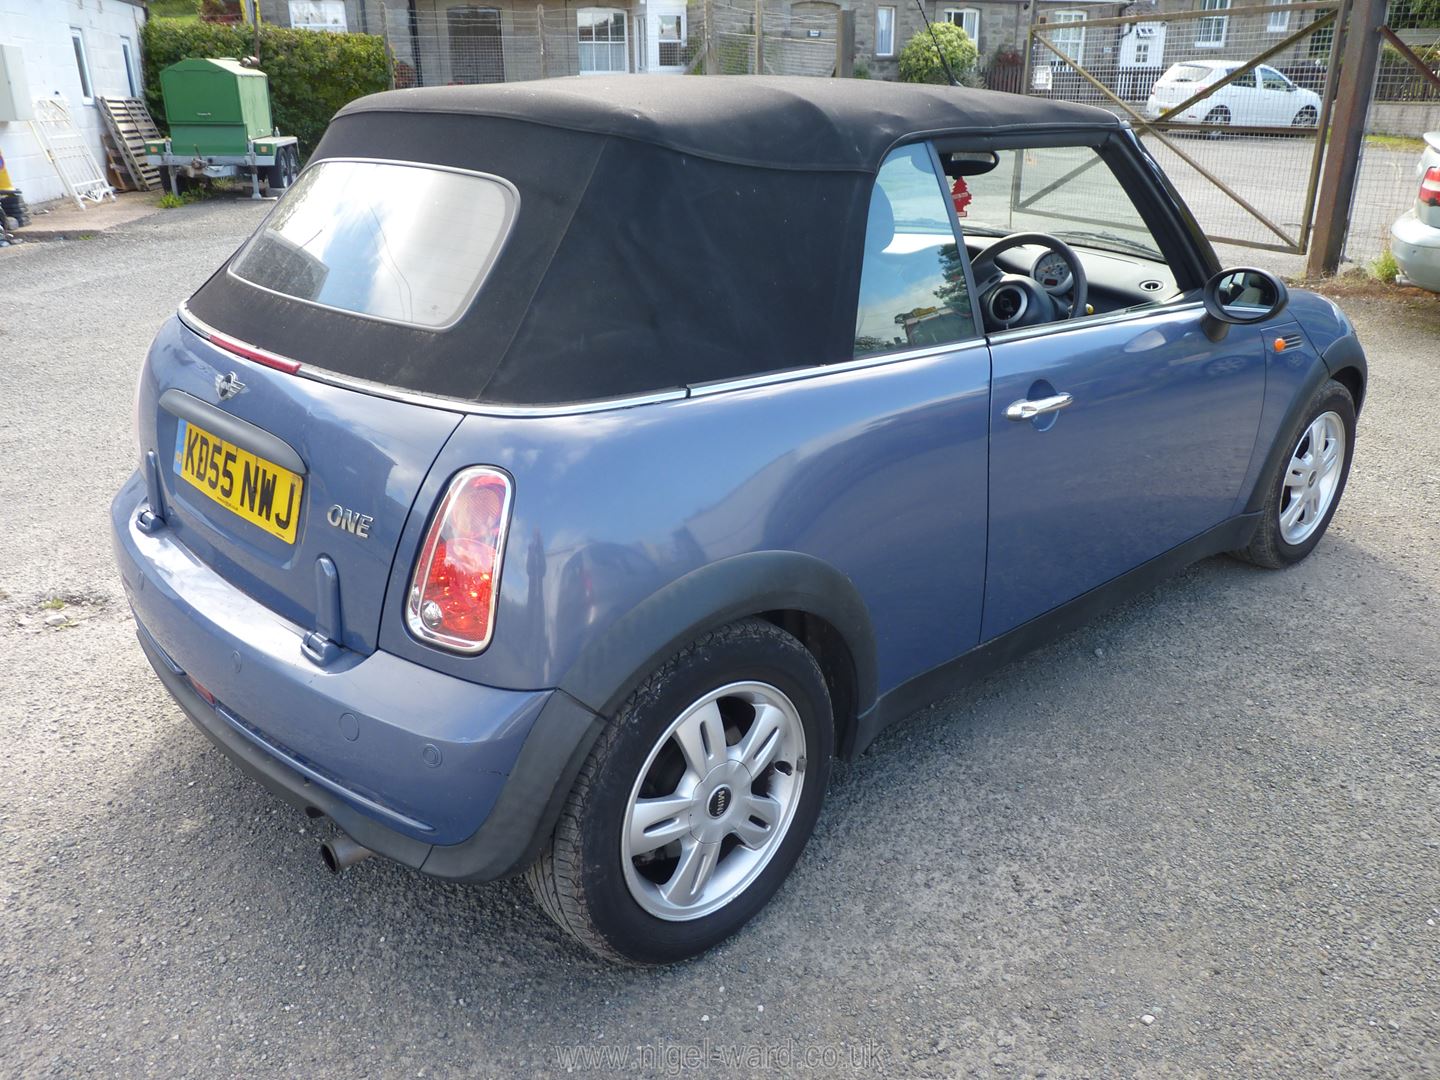 A BMW Mini One Convertible, - Image 15 of 62